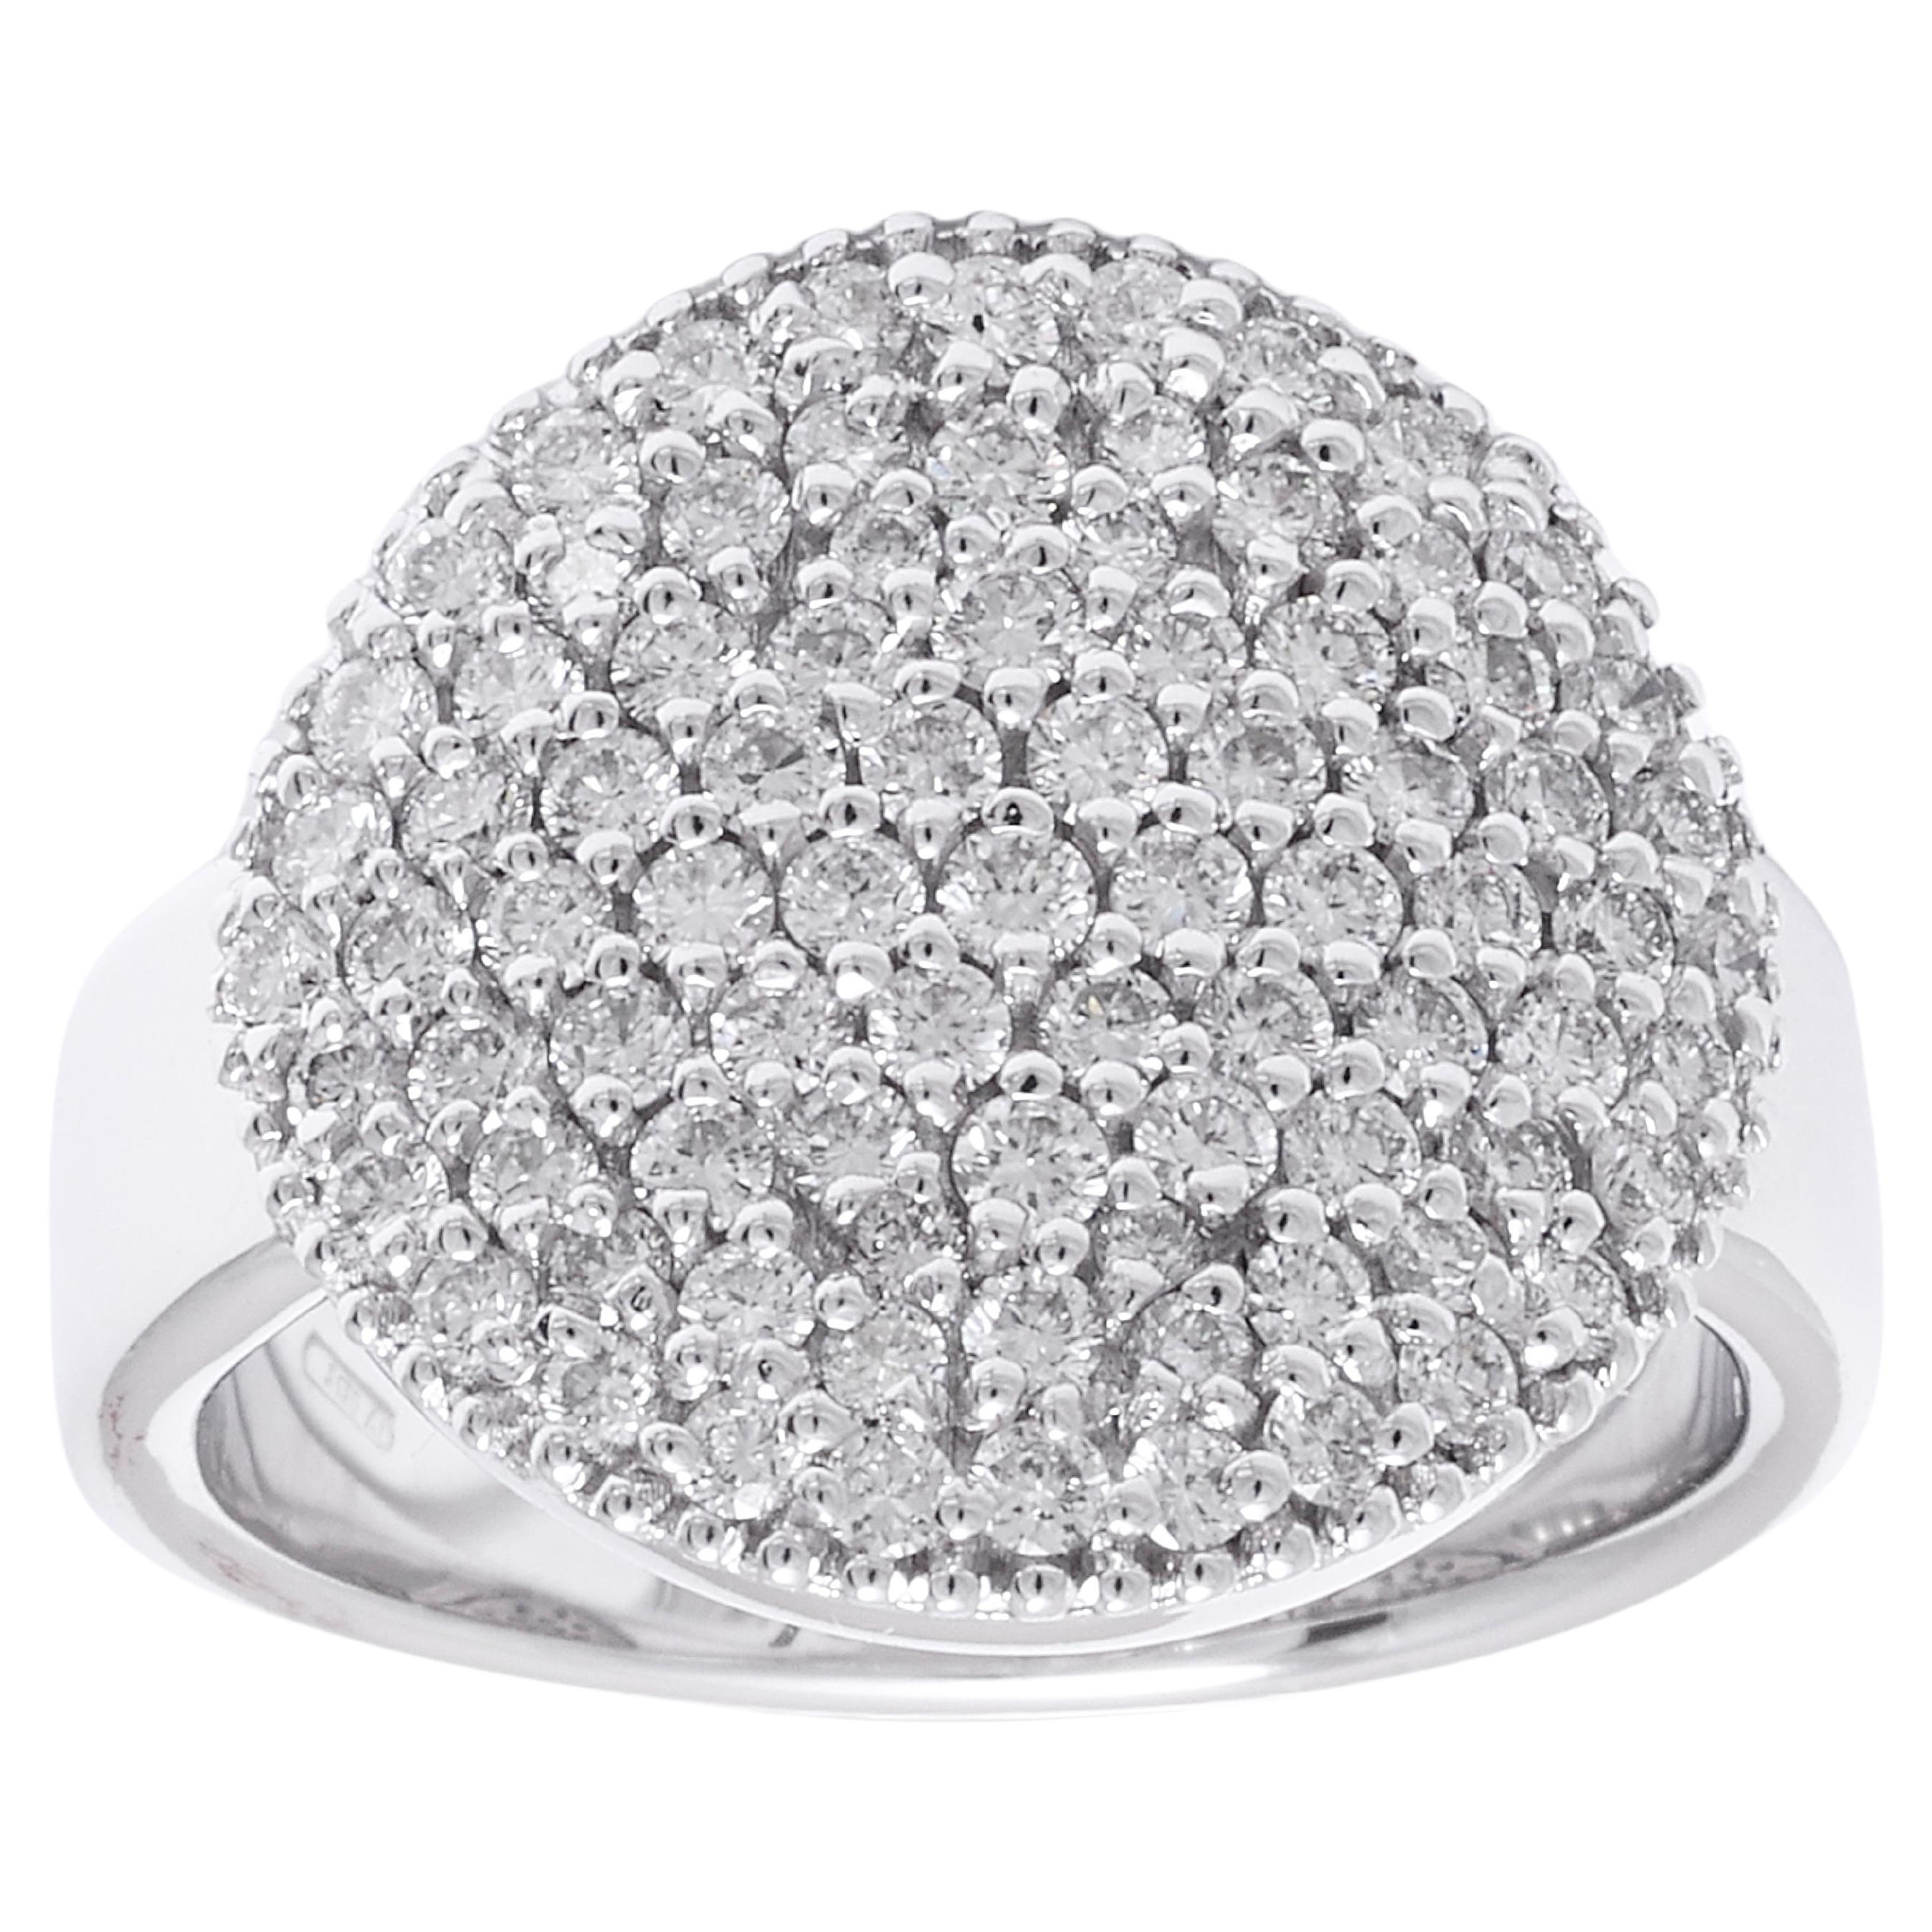 Gorgeous 18 kt. White Gold Pavé Set with 1.12 ct. diamond Ring

Diamonds: brilliant cut diamonds together 1.12 ct.

Material: 18 kt. white gold

Ring size: 52.5 EU / 6.25 US ( ring size can be changed for free ) 

Total weight: 10.2 grams / 6.6 dwt